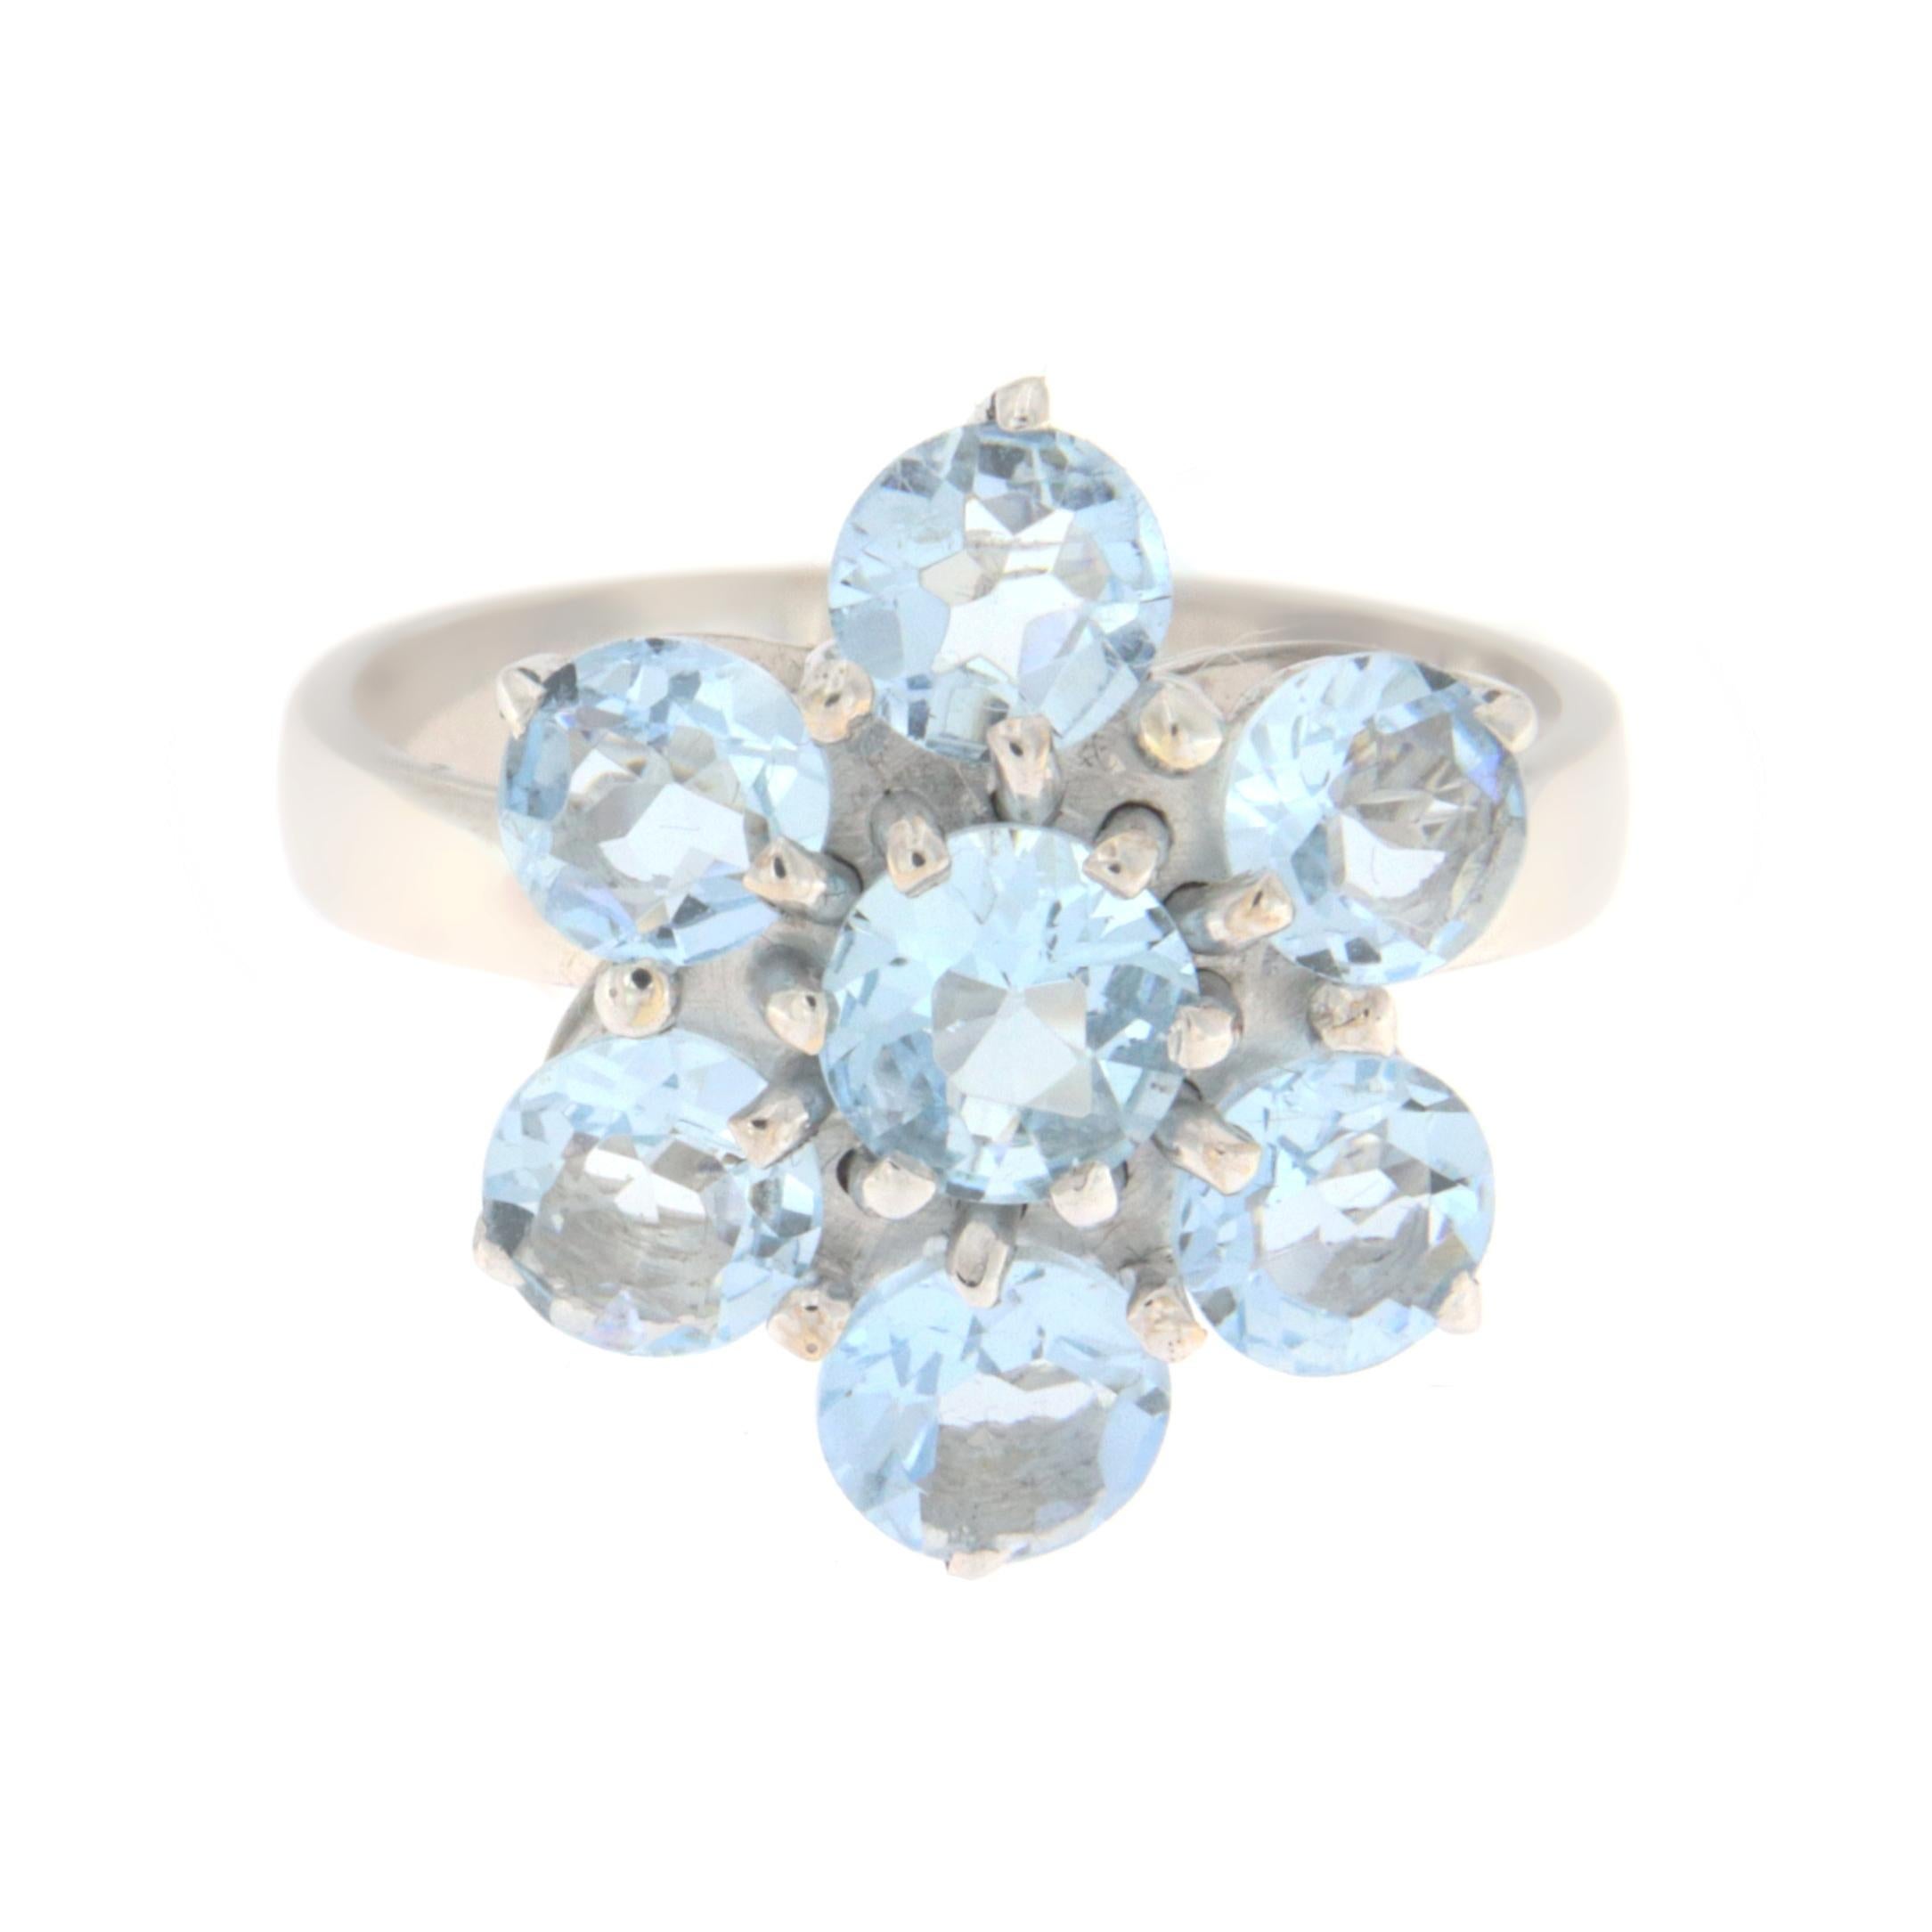 This delicate 18-karat white gold ring shaped like a little flower is a celebration of nature and elegance. Expertly designed, it features at its center 7 round aquamarines, each chosen for its sky-blue color reminiscent of serene skies and calm